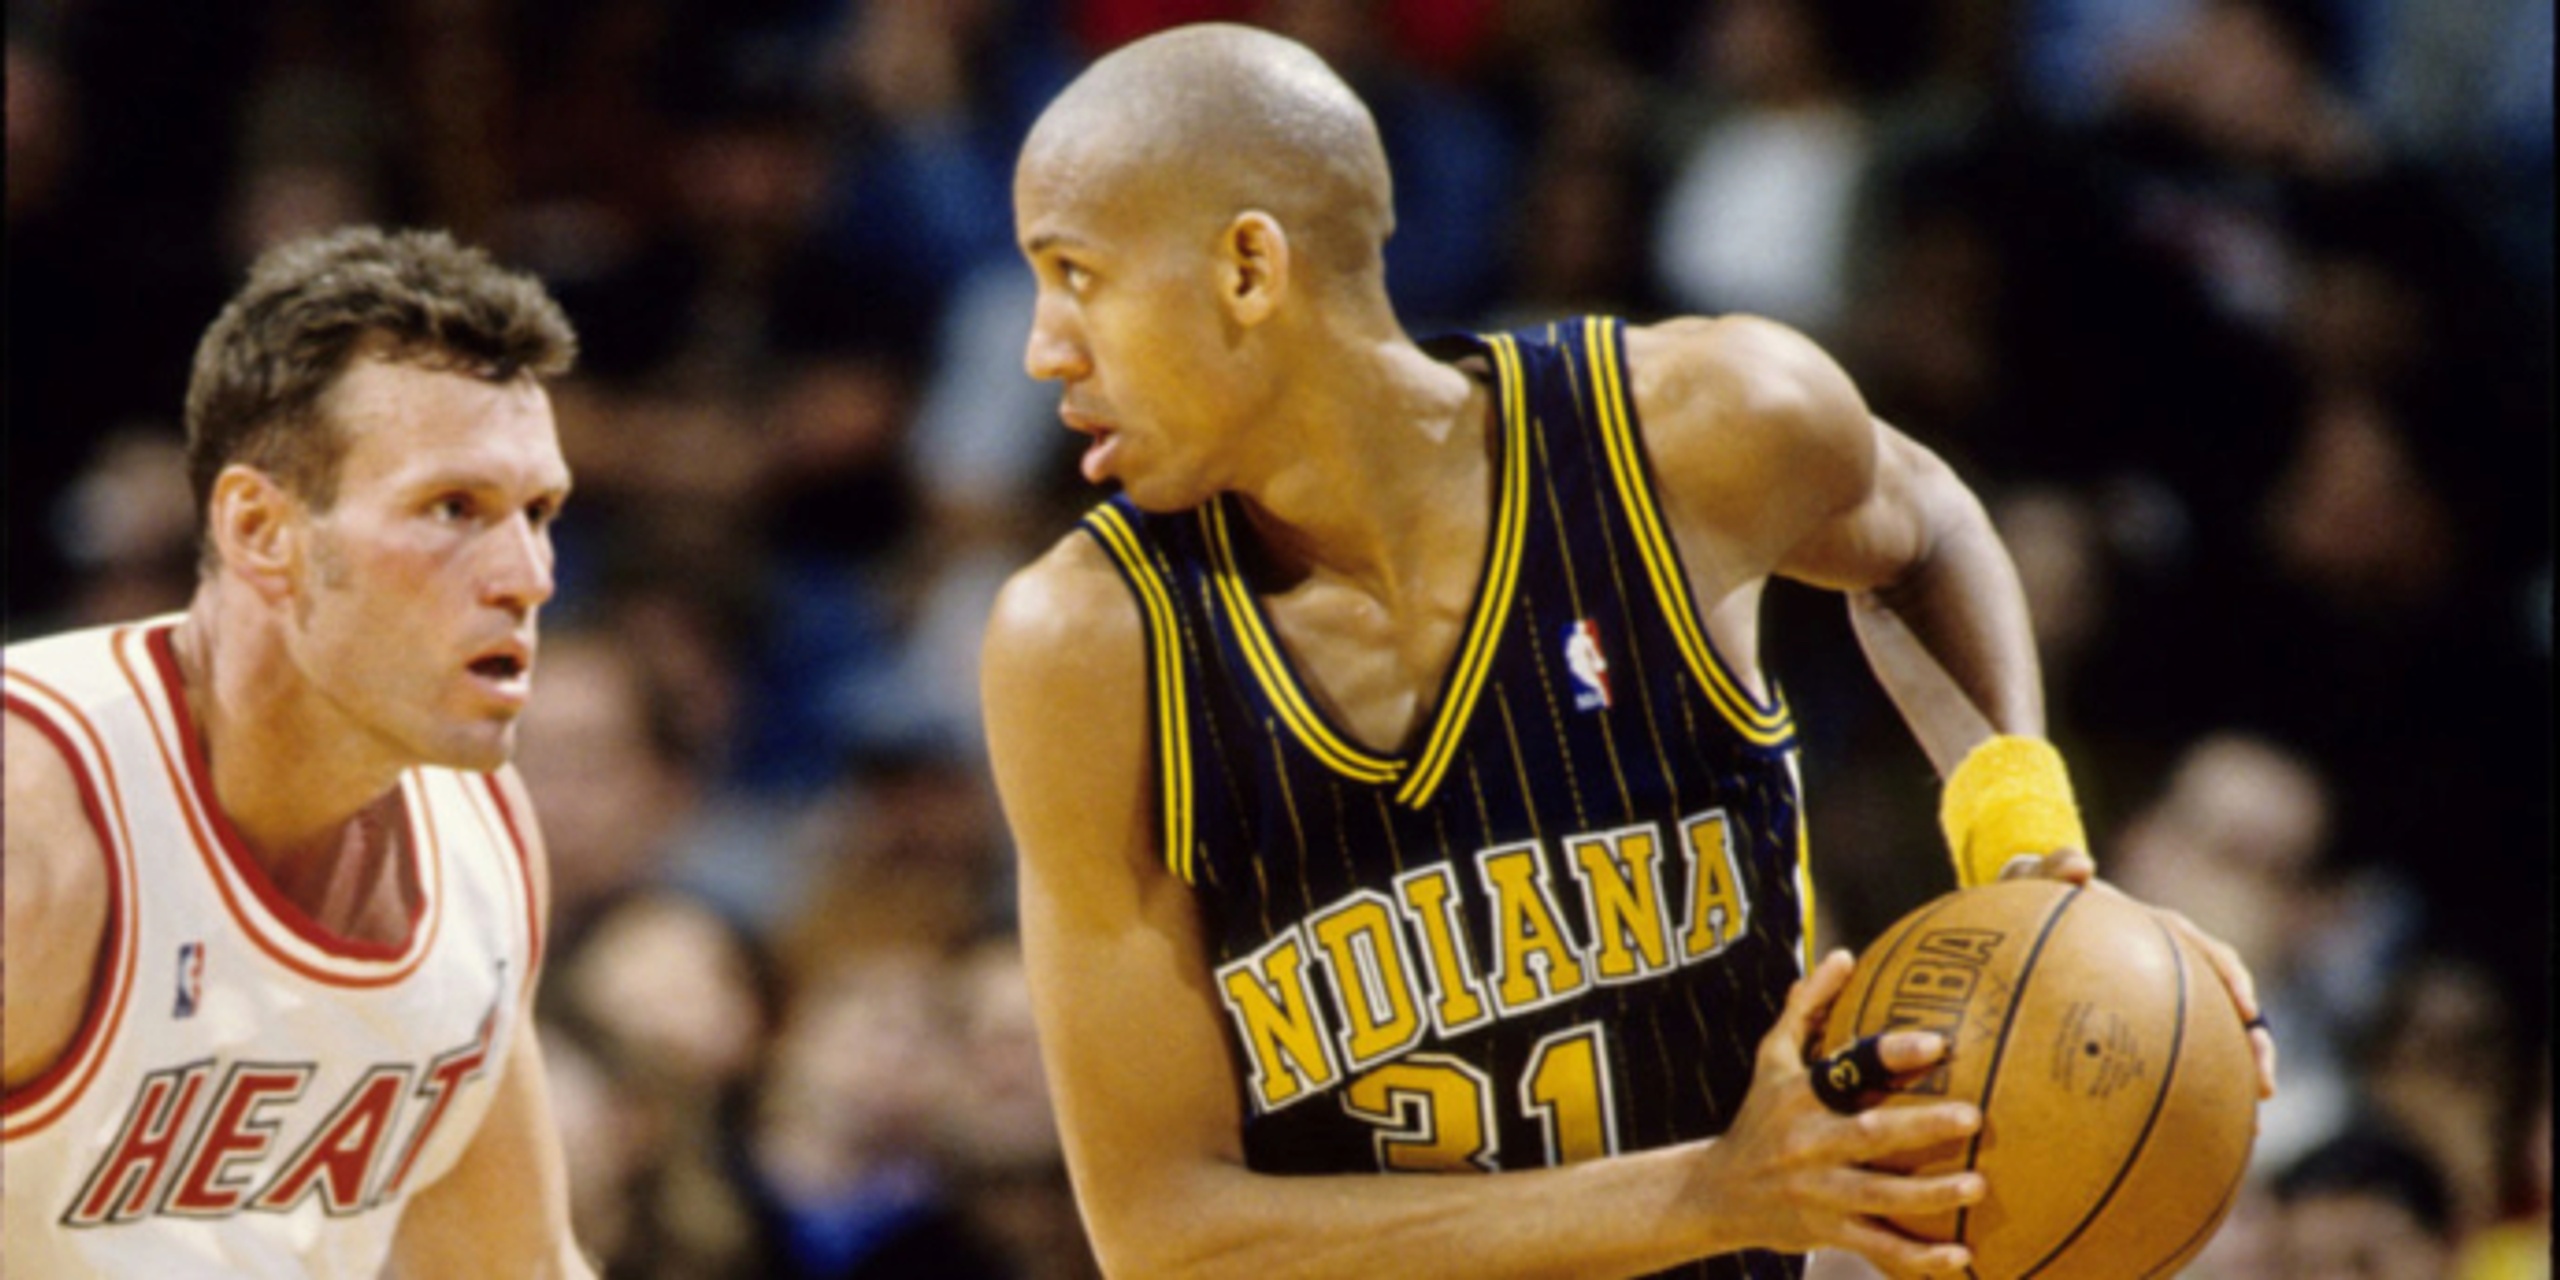 Why Reggie Miller turned down joining Boston's Big 3 in 2007